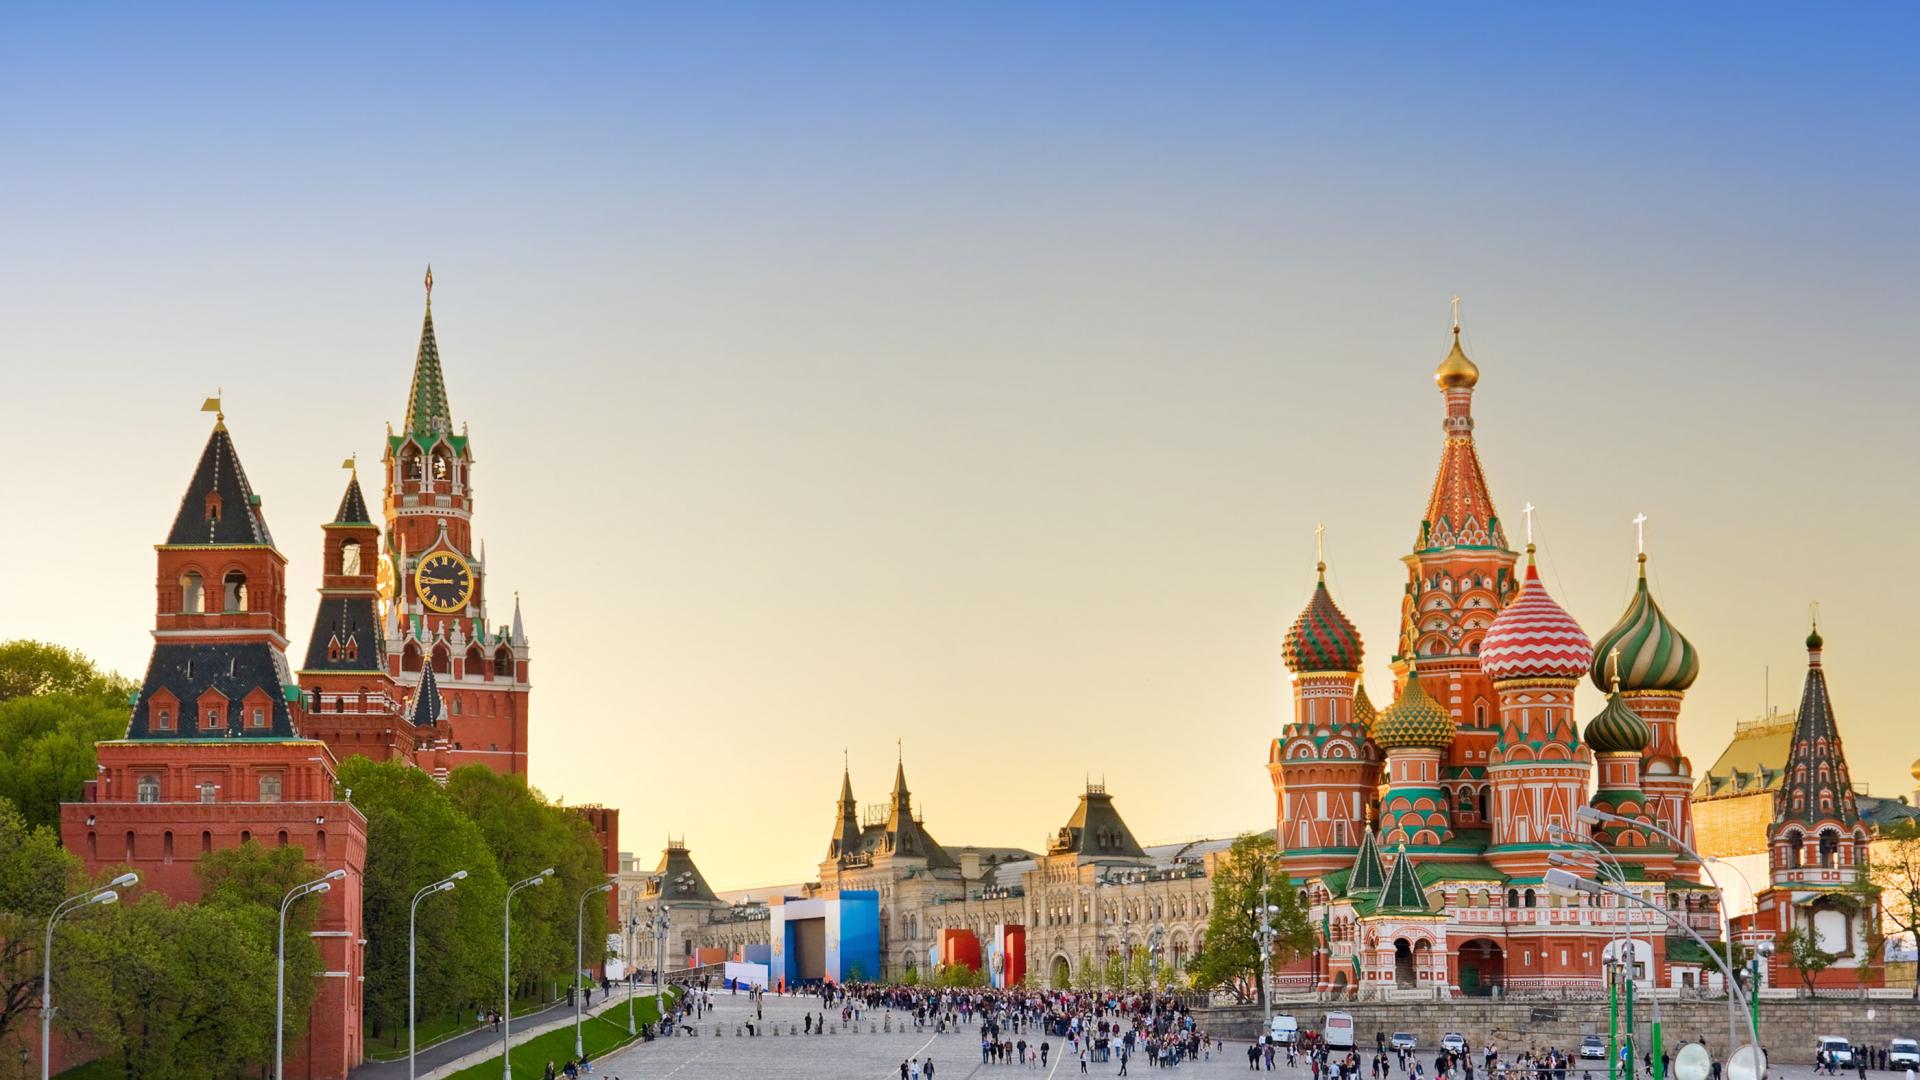 Experience the beauty of Russia! With its striking contrasts, Russia offers a near endless variety of picture-perfect landscapes straddling two continents, ...